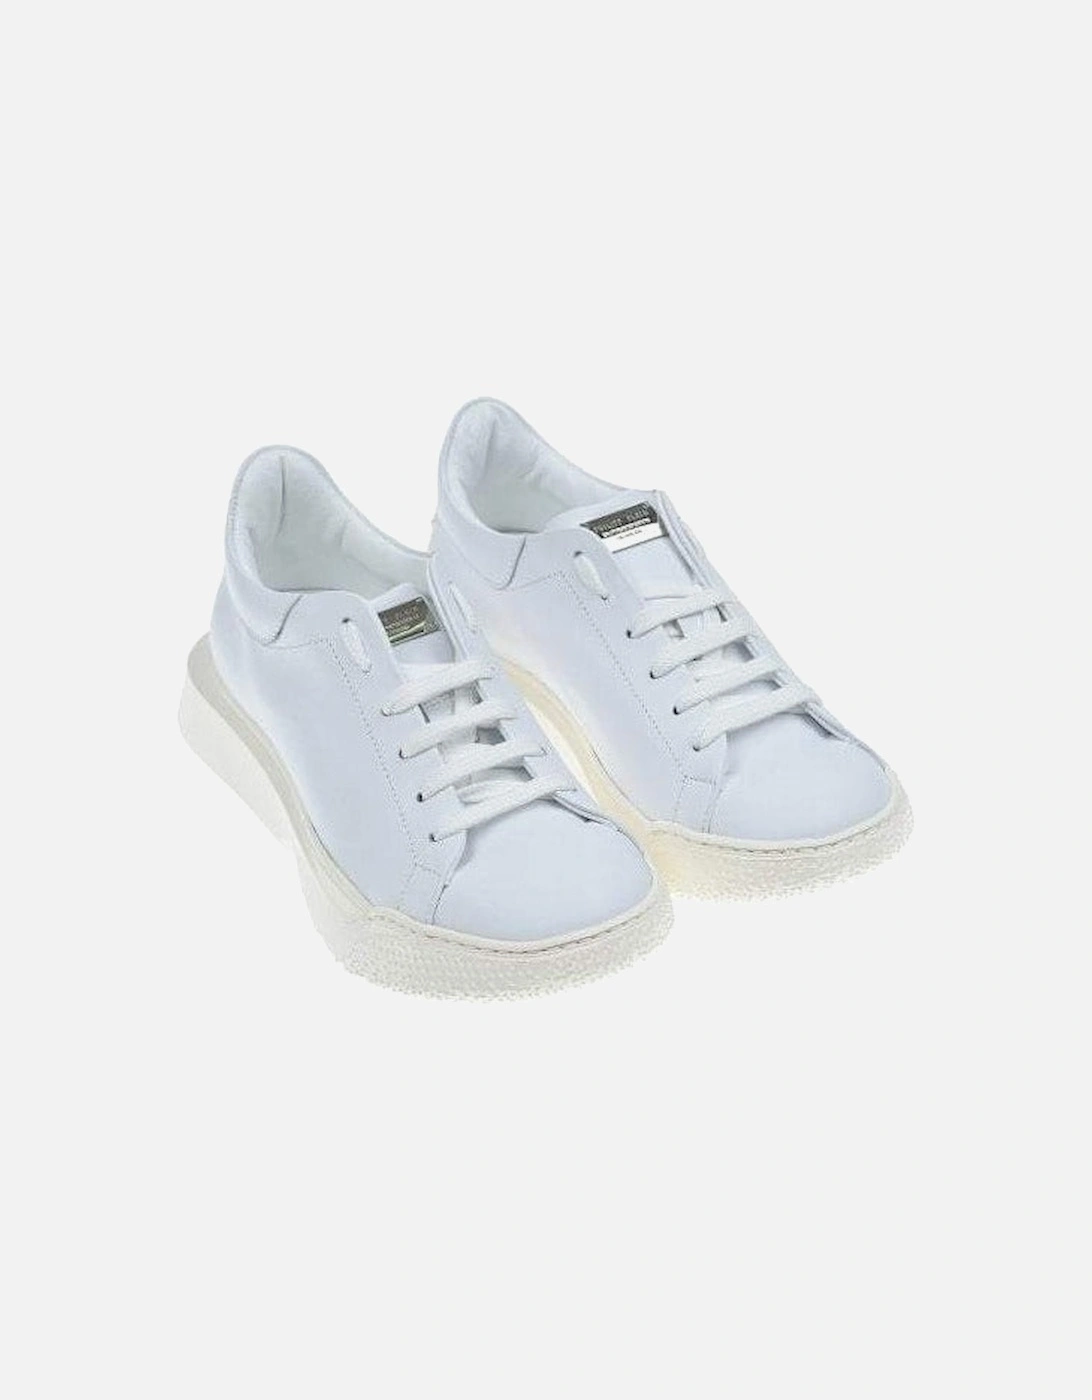 Boys Trainers White